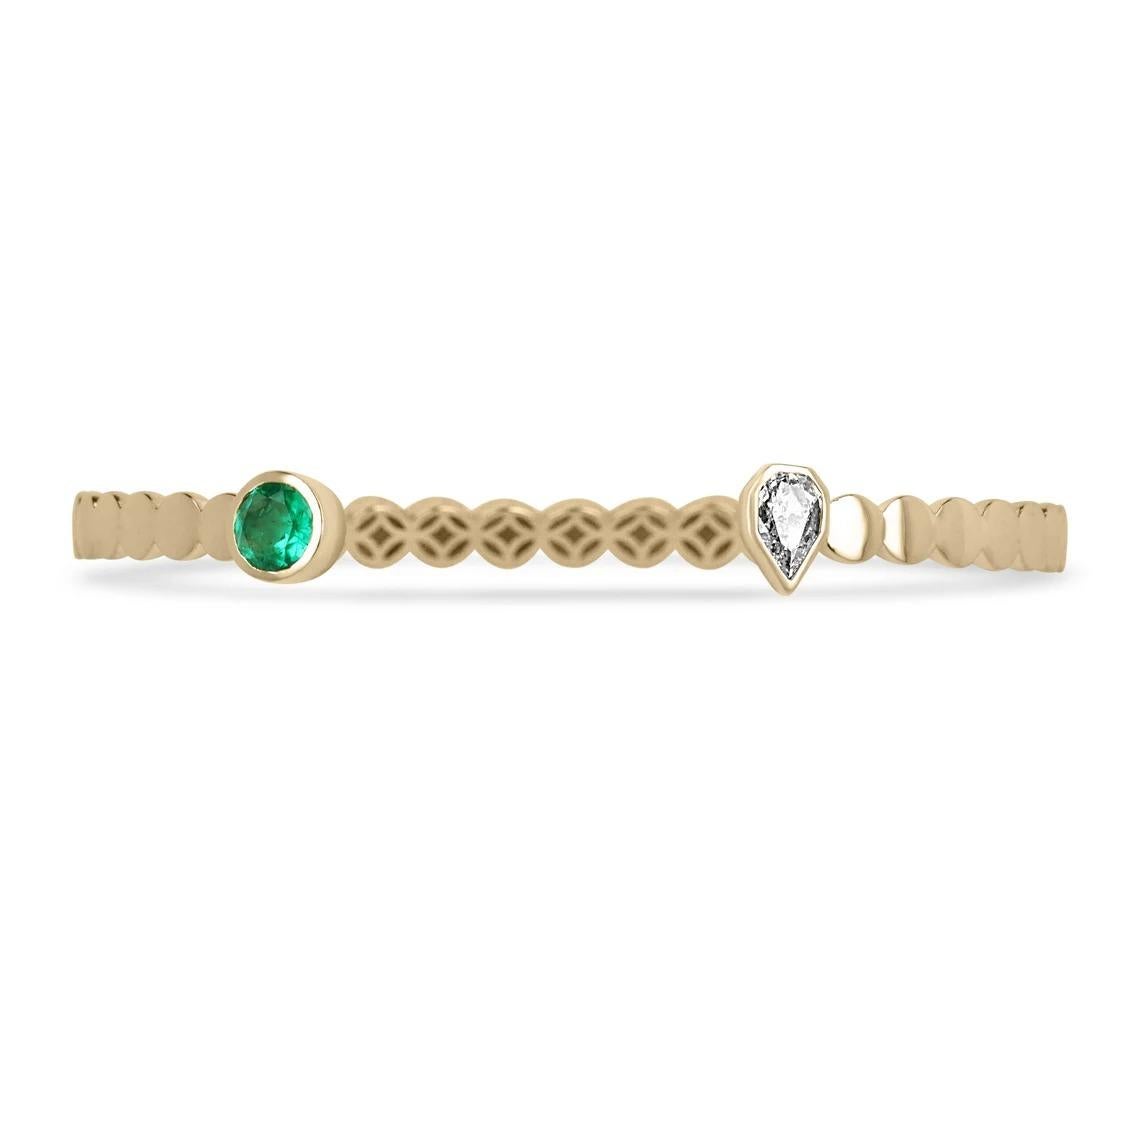 Setting Style: Bezel
Setting Material: 18K Yellow Gold
Setting Weight: 10.5 Grams

Main Stone: Emerald
Shape: Round Cut
Weight: 0.79-Carats
Clarity: Transparent
Color: Vivid Green
Luster: Excellent
Treatments: Natural, Oiling
Origin: